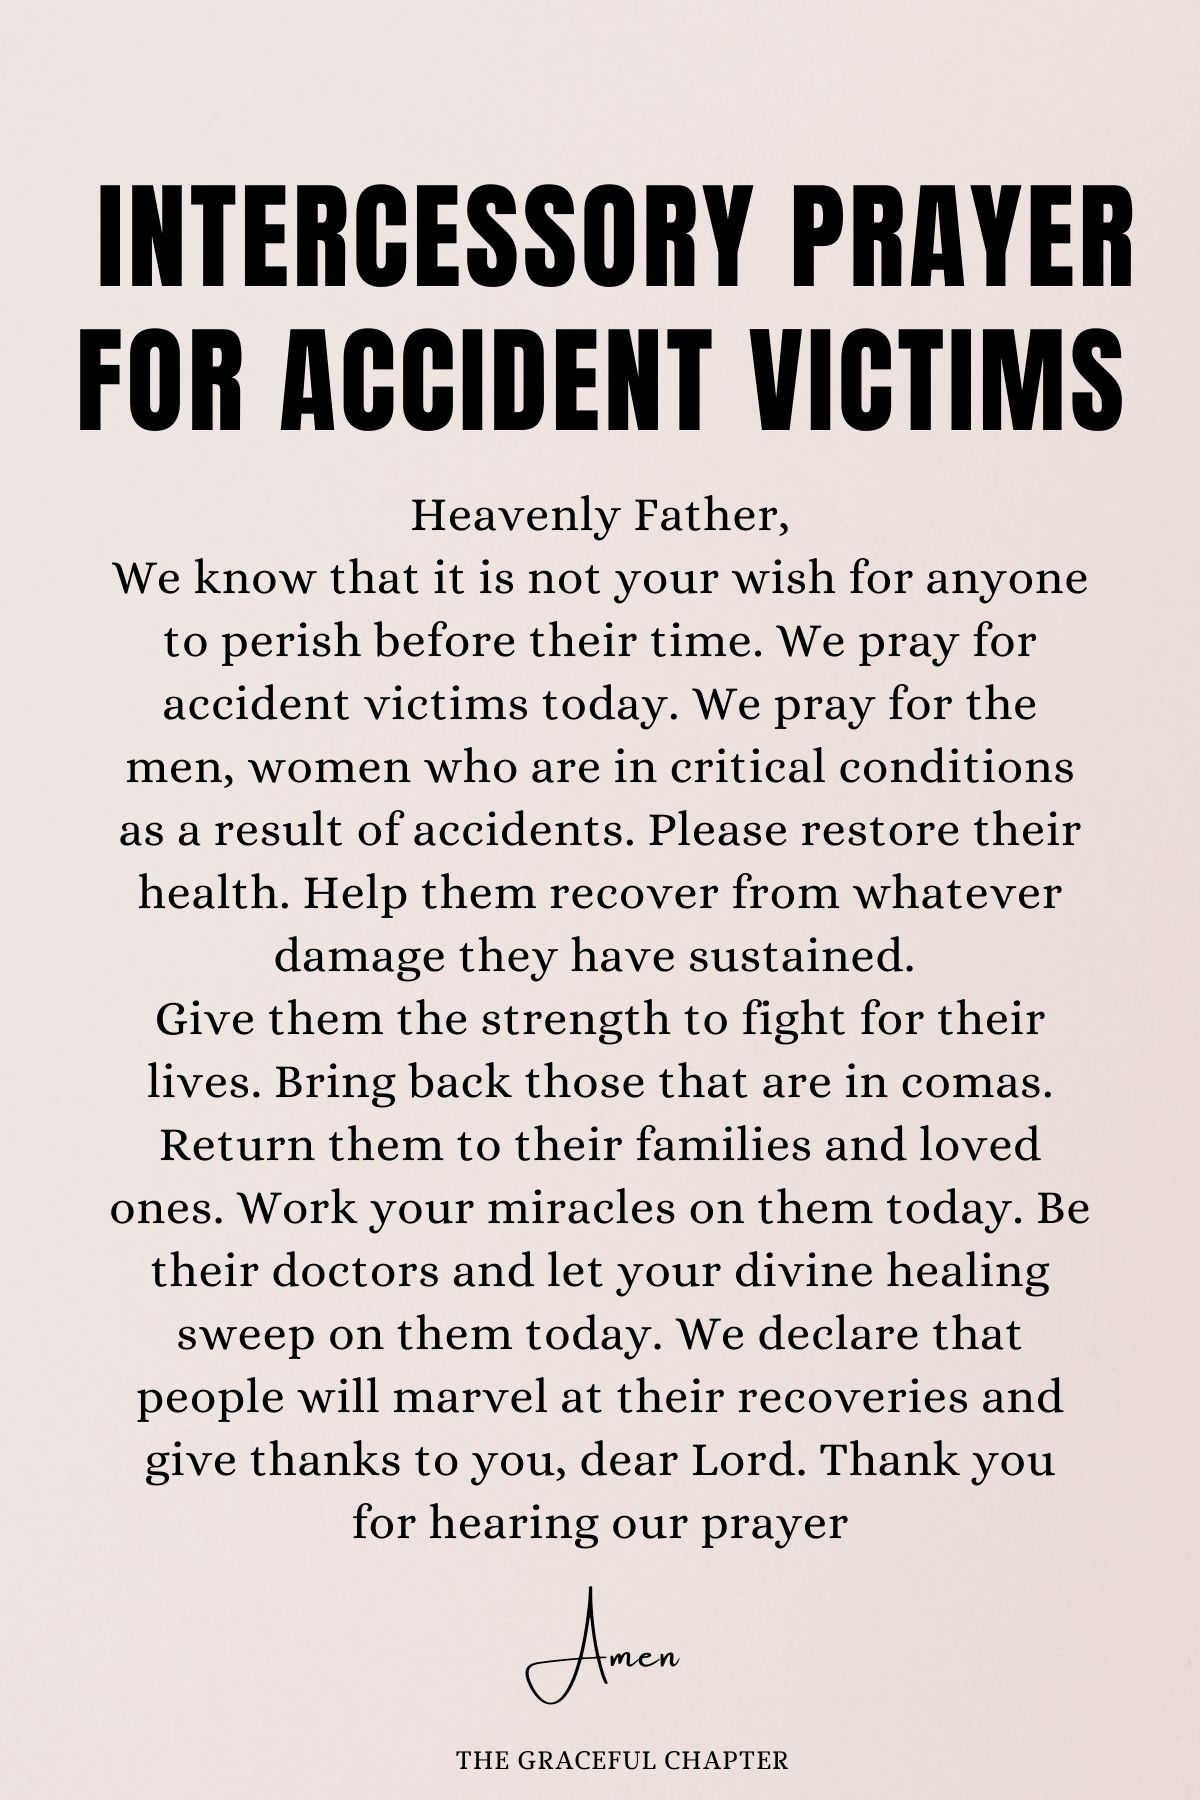  Intercessory prayer for accident victims